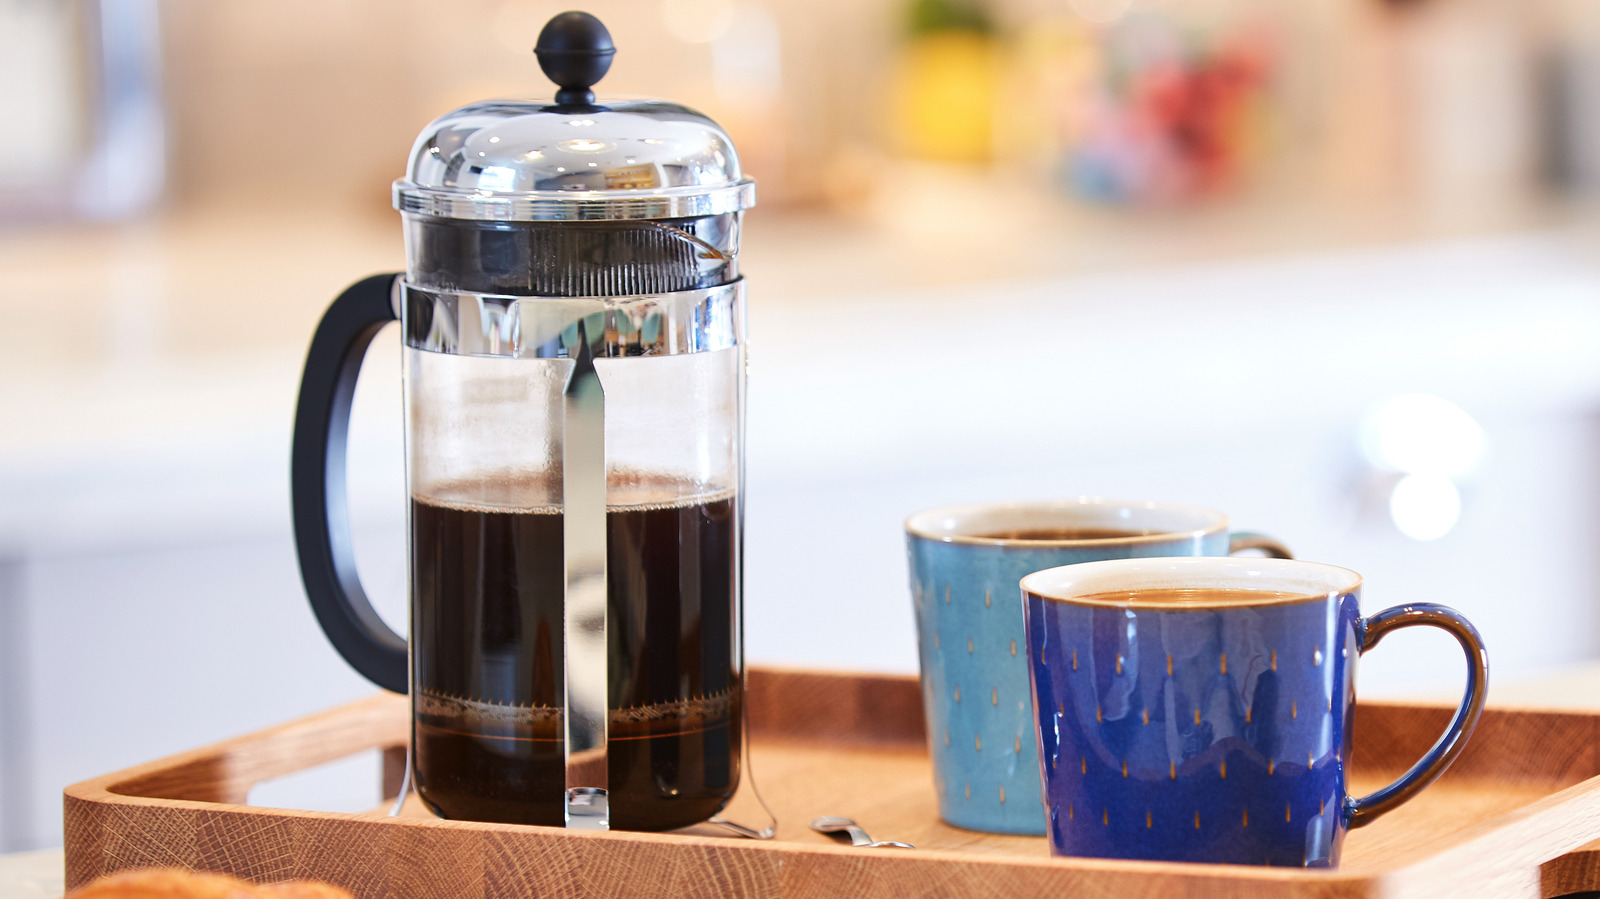 French Press vs AeroPress: What Is The Difference?